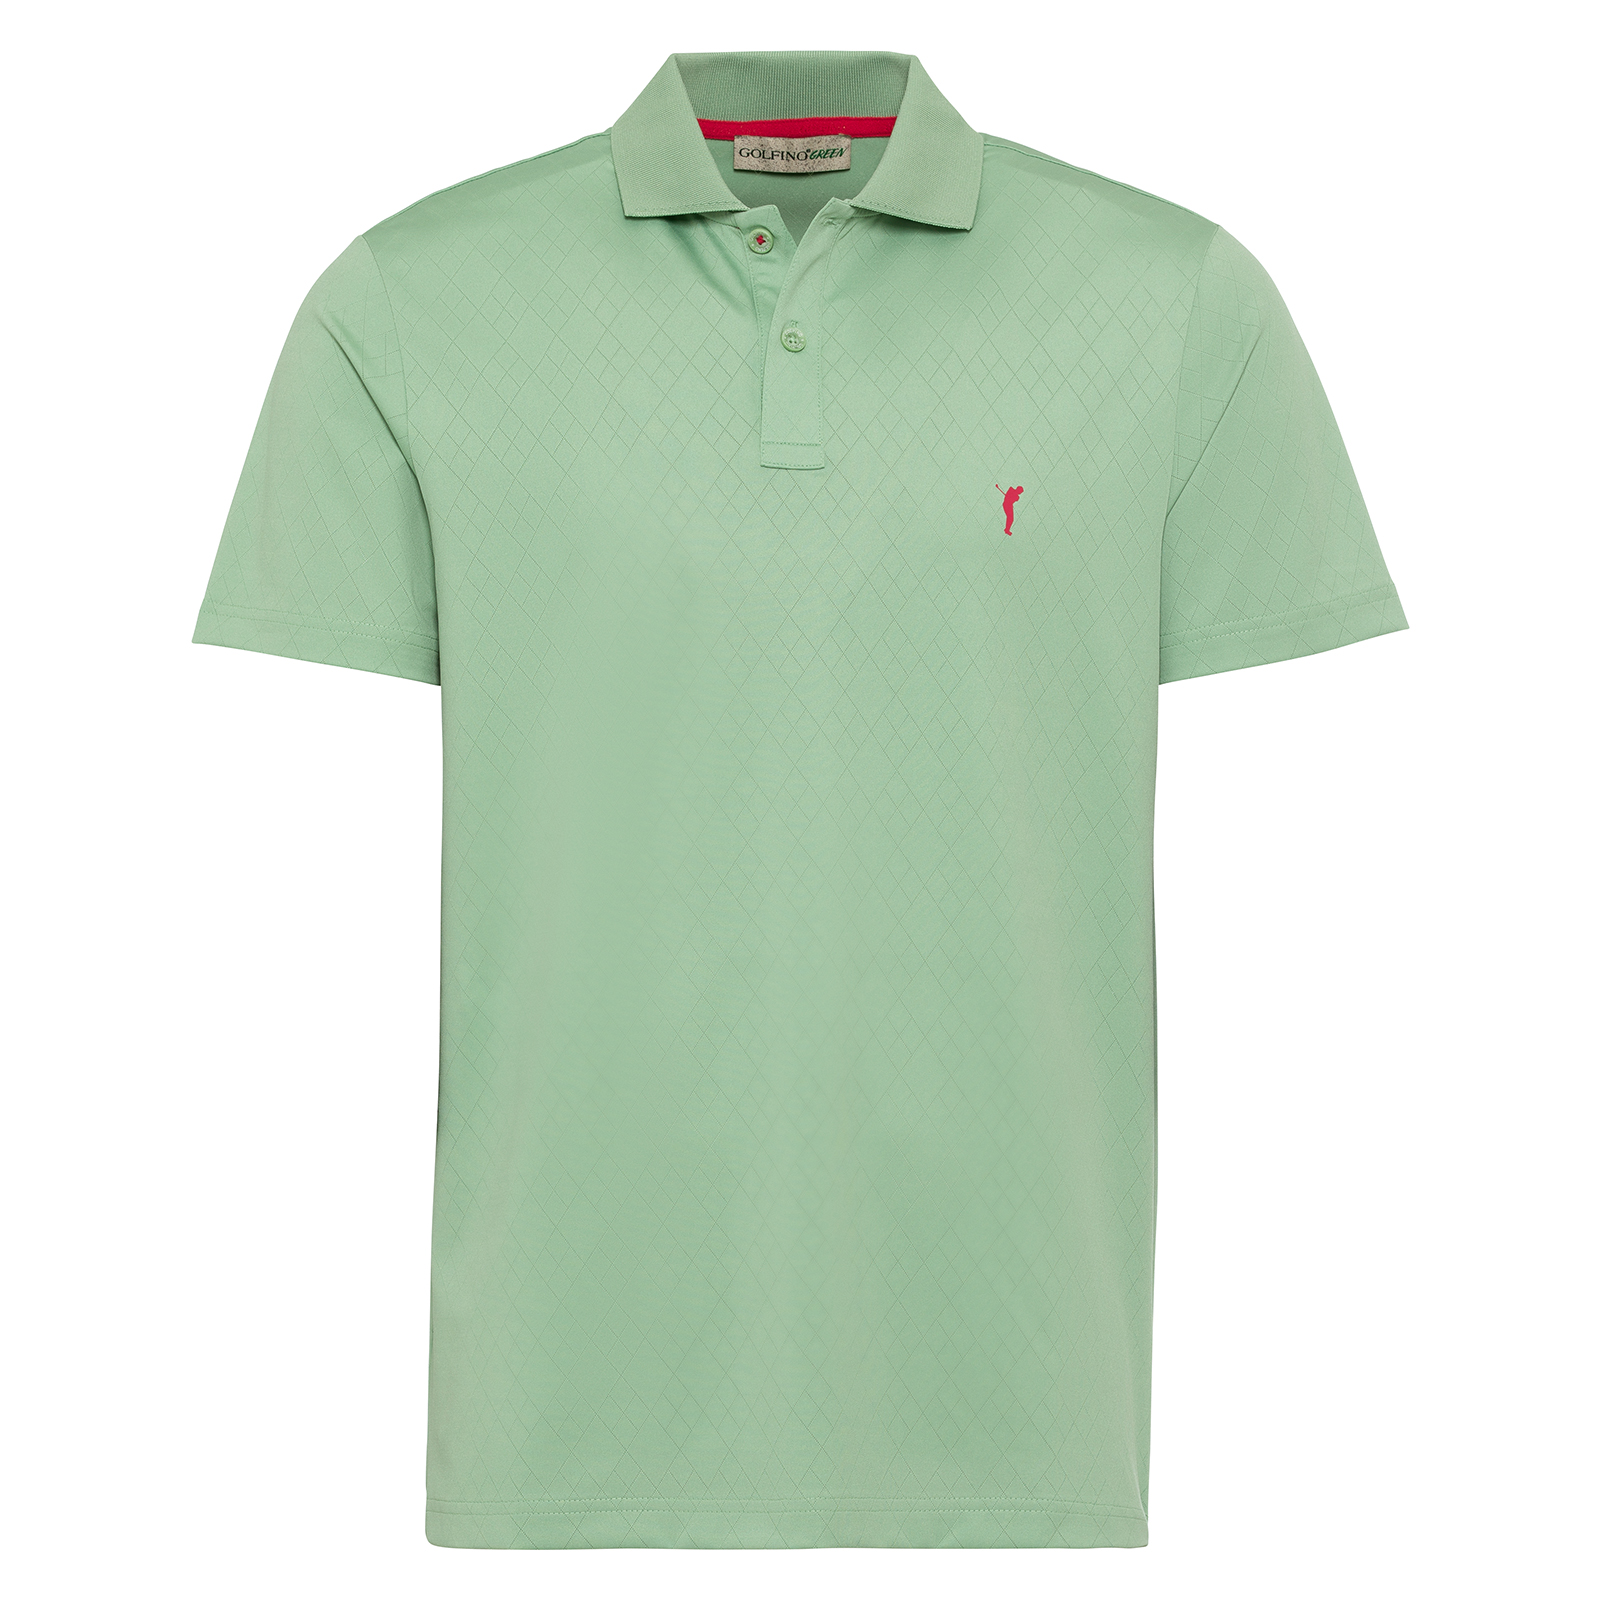 Men's sustainable stretch jacquard golf polo shirt 